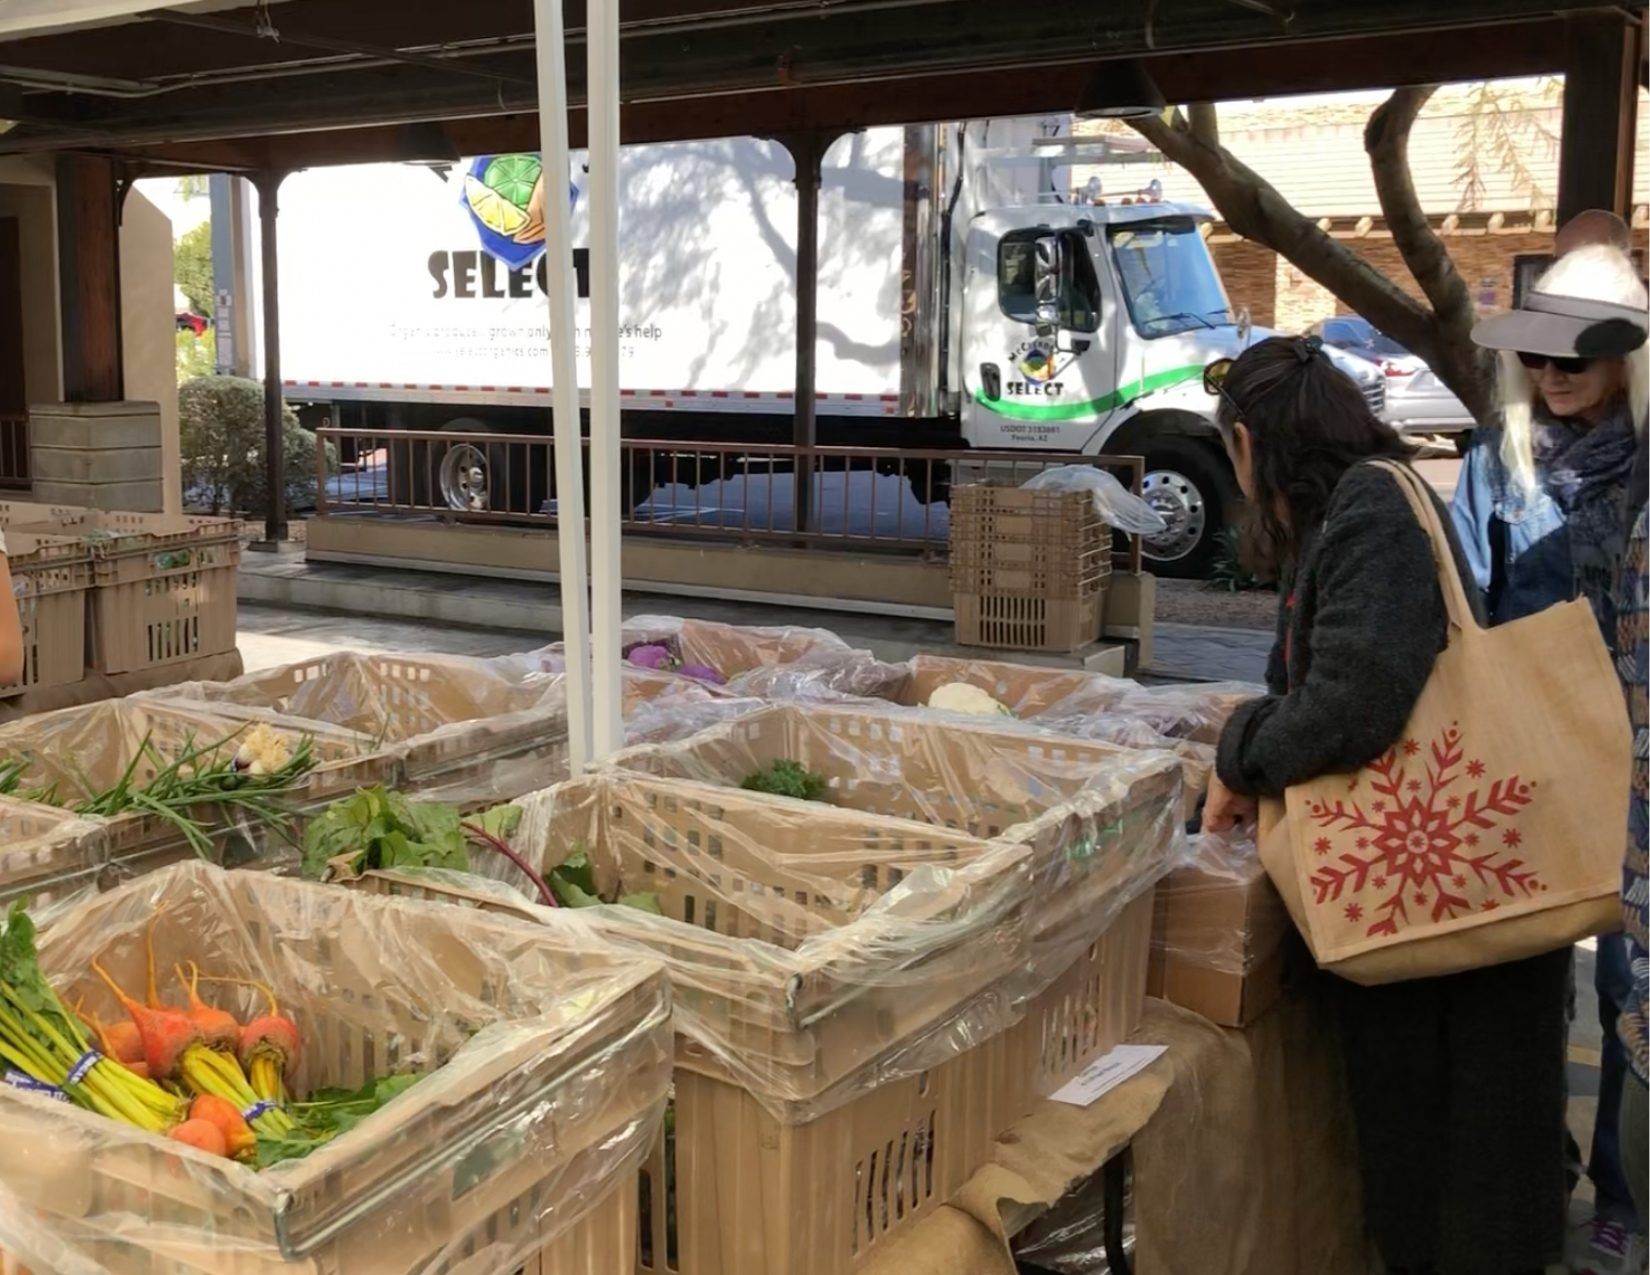 two women on the right looking thru boxes filled with fresh vegetables at a farmers market